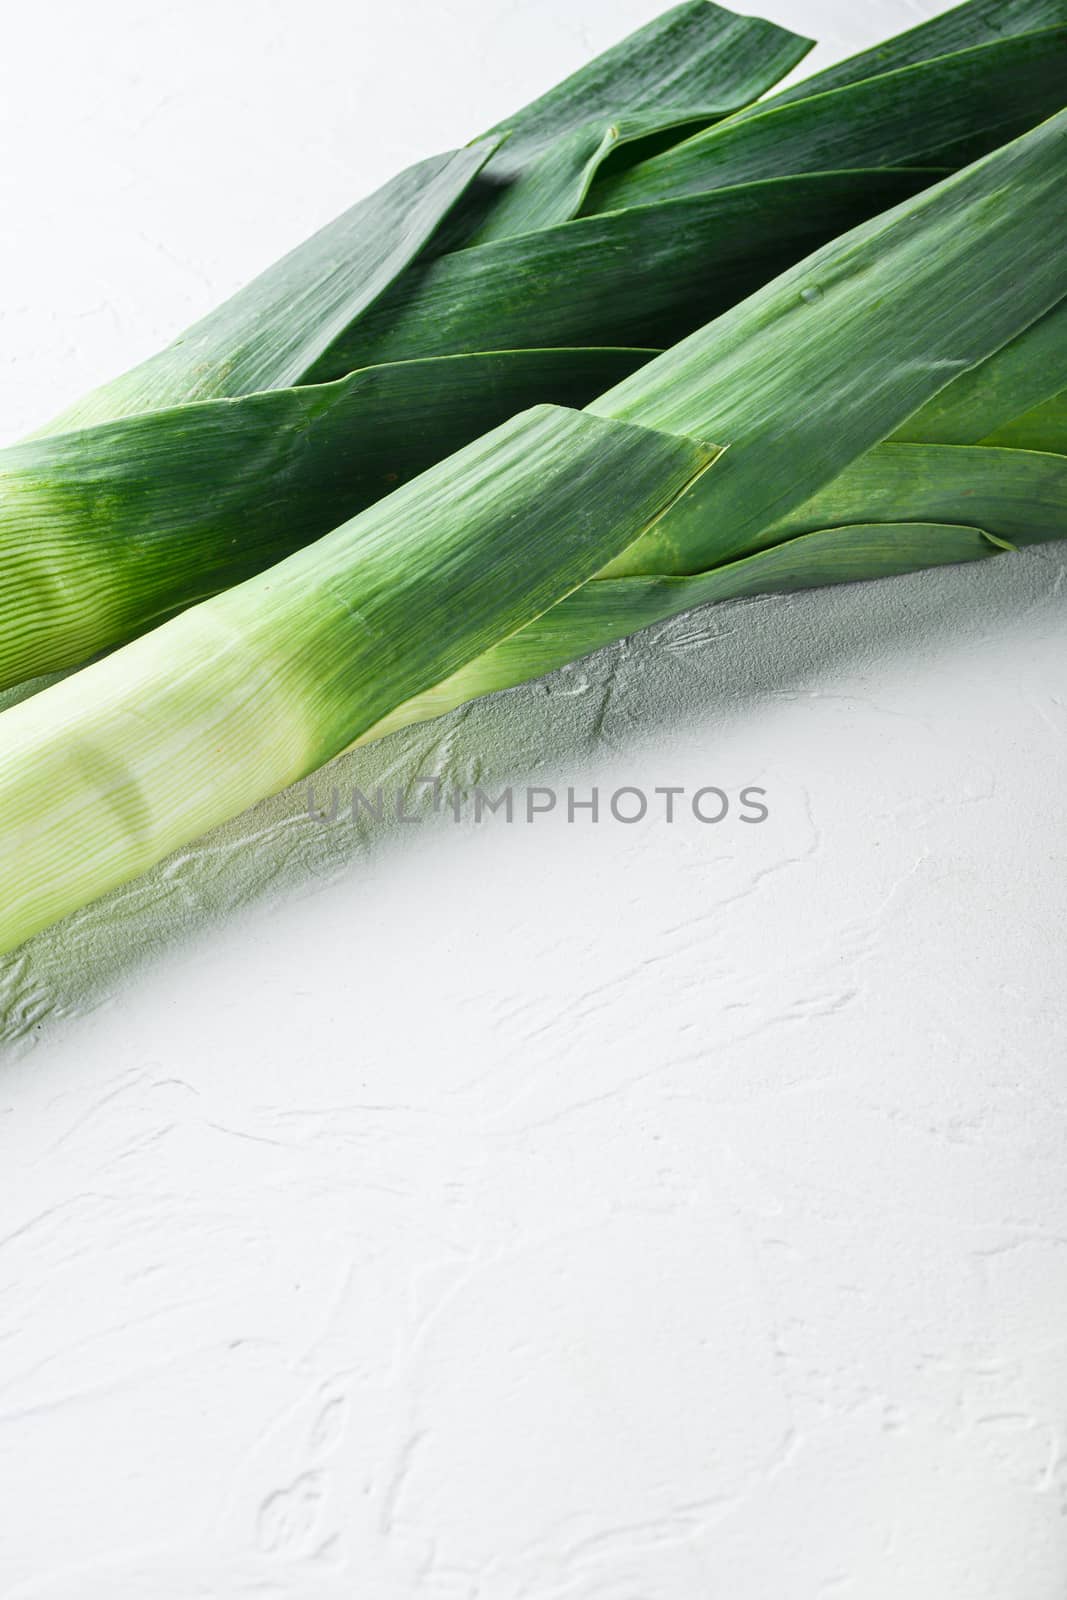 Organic Leek onion Stalks on white background, side view, selective focus space for text